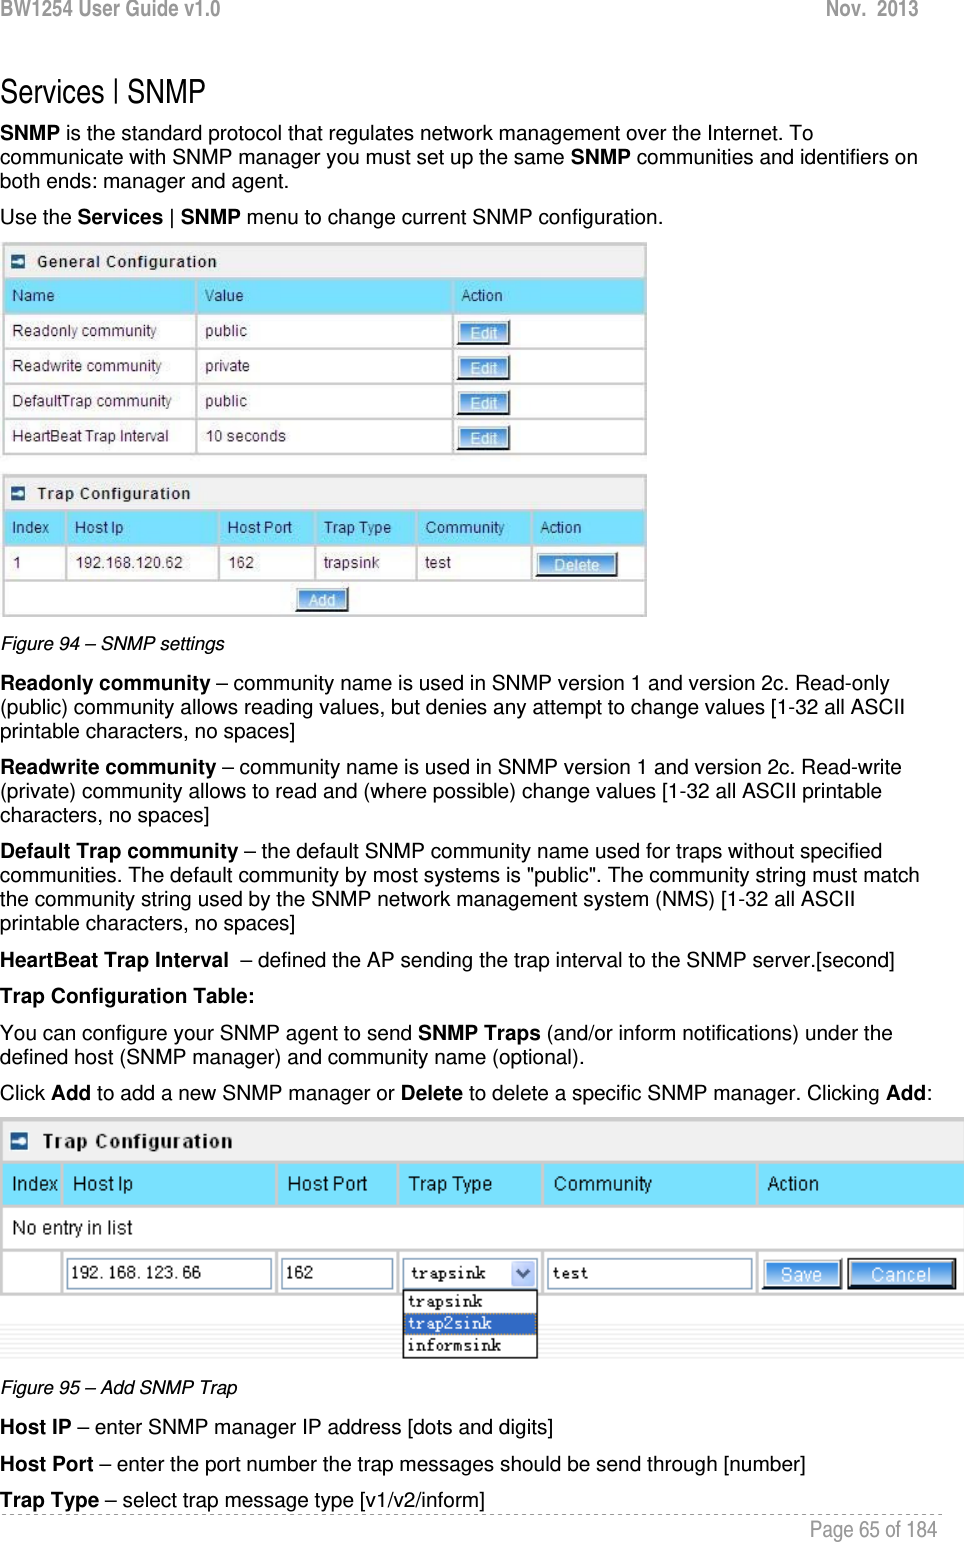 BW1254 User Guide v1.0  Nov.  2013     Page 65 of 184   Services | SNMP SNMP is the standard protocol that regulates network management over the Internet. To communicate with SNMP manager you must set up the same SNMP communities and identifiers on both ends: manager and agent. Use the Services | SNMP menu to change current SNMP configuration.  Figure 94 – SNMP settings Readonly community – community name is used in SNMP version 1 and version 2c. Read-only (public) community allows reading values, but denies any attempt to change values [1-32 all ASCII printable characters, no spaces] Readwrite community – community name is used in SNMP version 1 and version 2c. Read-write (private) community allows to read and (where possible) change values [1-32 all ASCII printable characters, no spaces] Default Trap community – the default SNMP community name used for traps without specified communities. The default community by most systems is &quot;public&quot;. The community string must match the community string used by the SNMP network management system (NMS) [1-32 all ASCII printable characters, no spaces] HeartBeat Trap Interval  – defined the AP sending the trap interval to the SNMP server.[second] Trap Configuration Table: You can configure your SNMP agent to send SNMP Traps (and/or inform notifications) under the defined host (SNMP manager) and community name (optional). Click Add to add a new SNMP manager or Delete to delete a specific SNMP manager. Clicking Add:  Figure 95 – Add SNMP Trap Host IP – enter SNMP manager IP address [dots and digits] Host Port – enter the port number the trap messages should be send through [number] Trap Type – select trap message type [v1/v2/inform] 